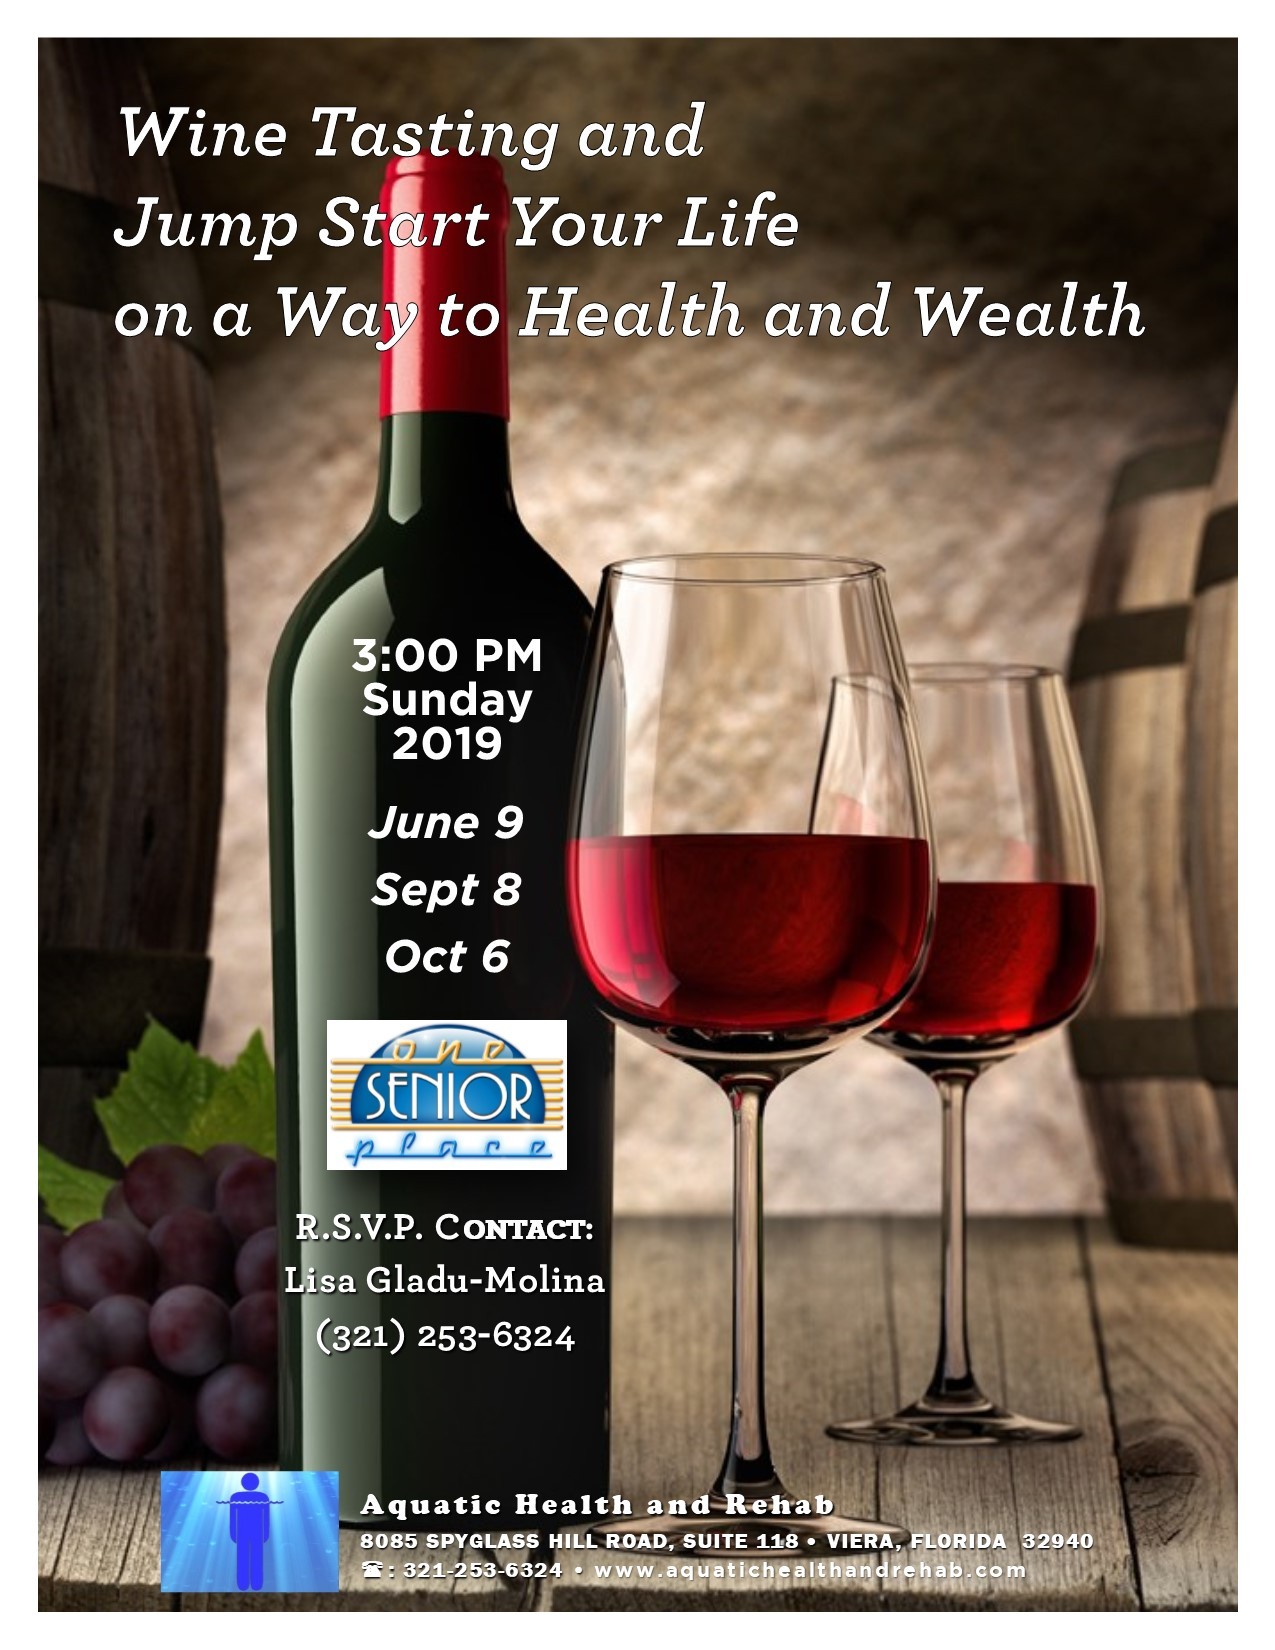 Wine and Wellness, presented by Aquatic Health and Rehab